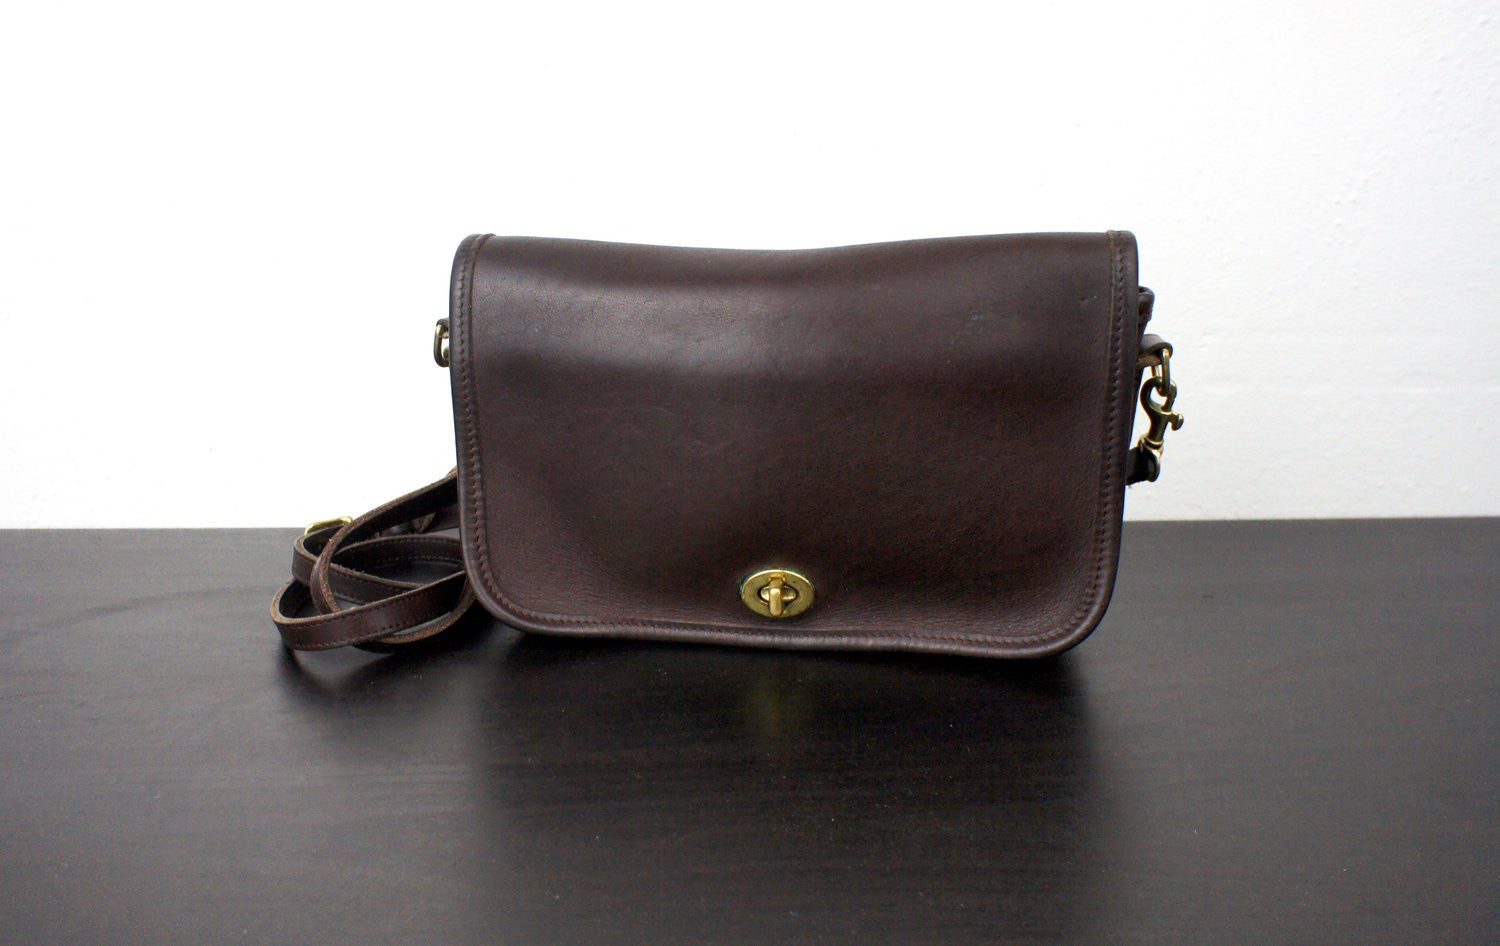 Vintage Brown Coach Convertible Clutch Bag with Turn Lock Closure